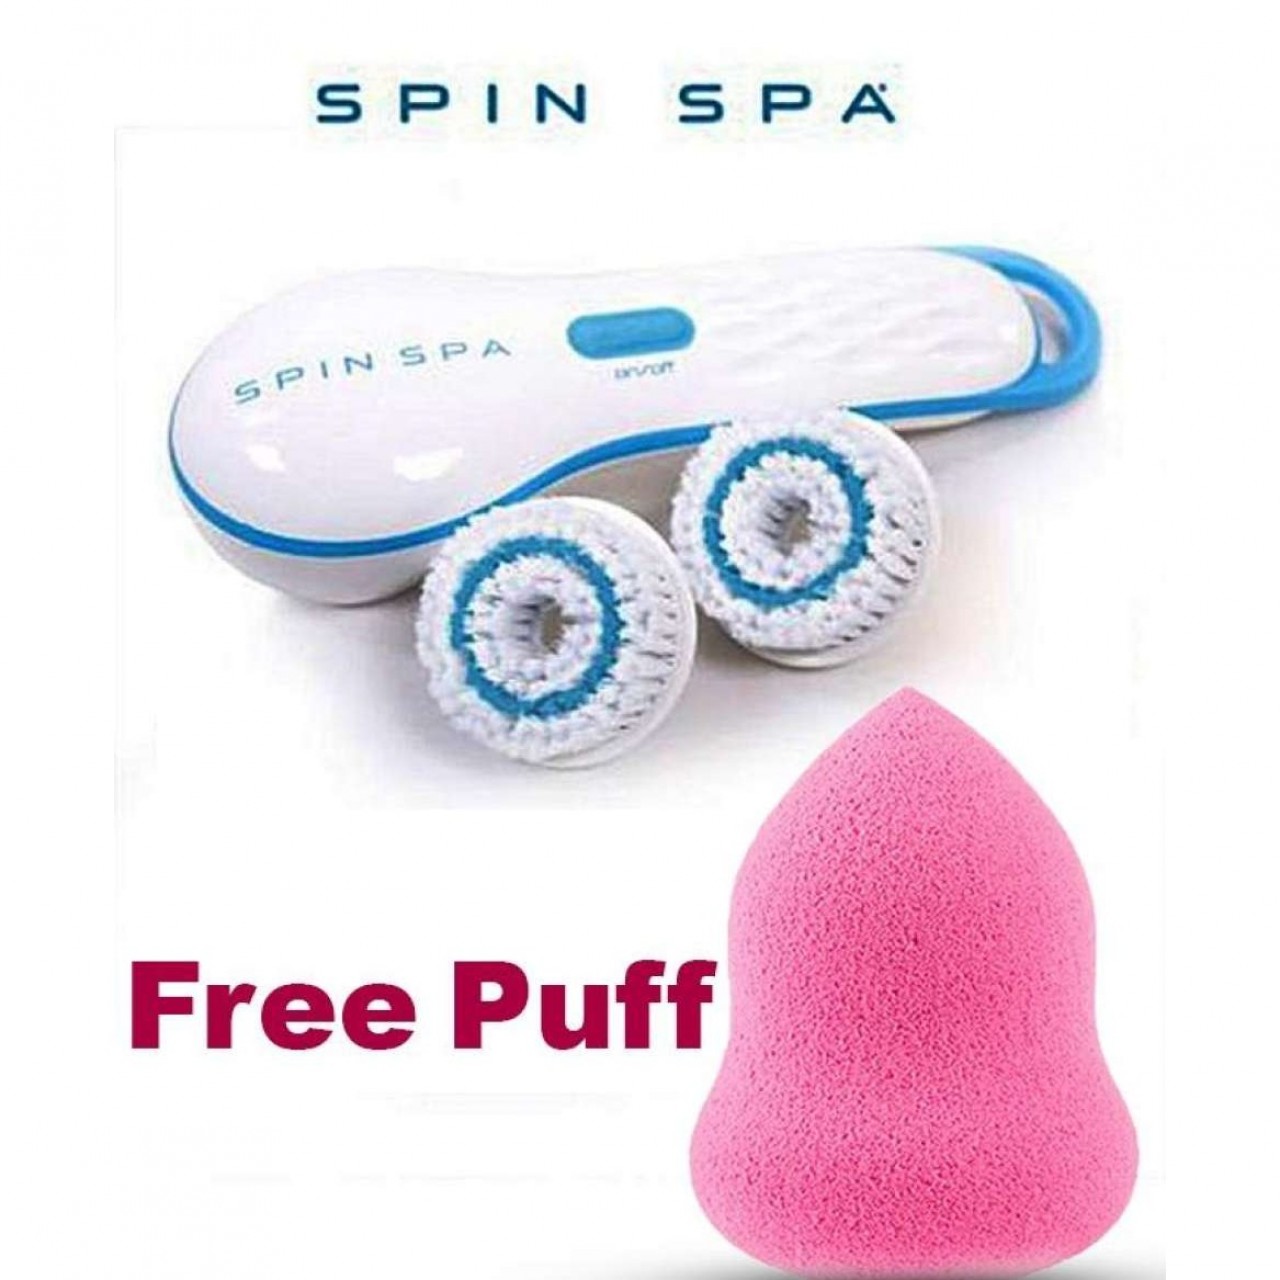 Spin Spa Cleansing Facial Brush & Blender Puff - Pack of 2